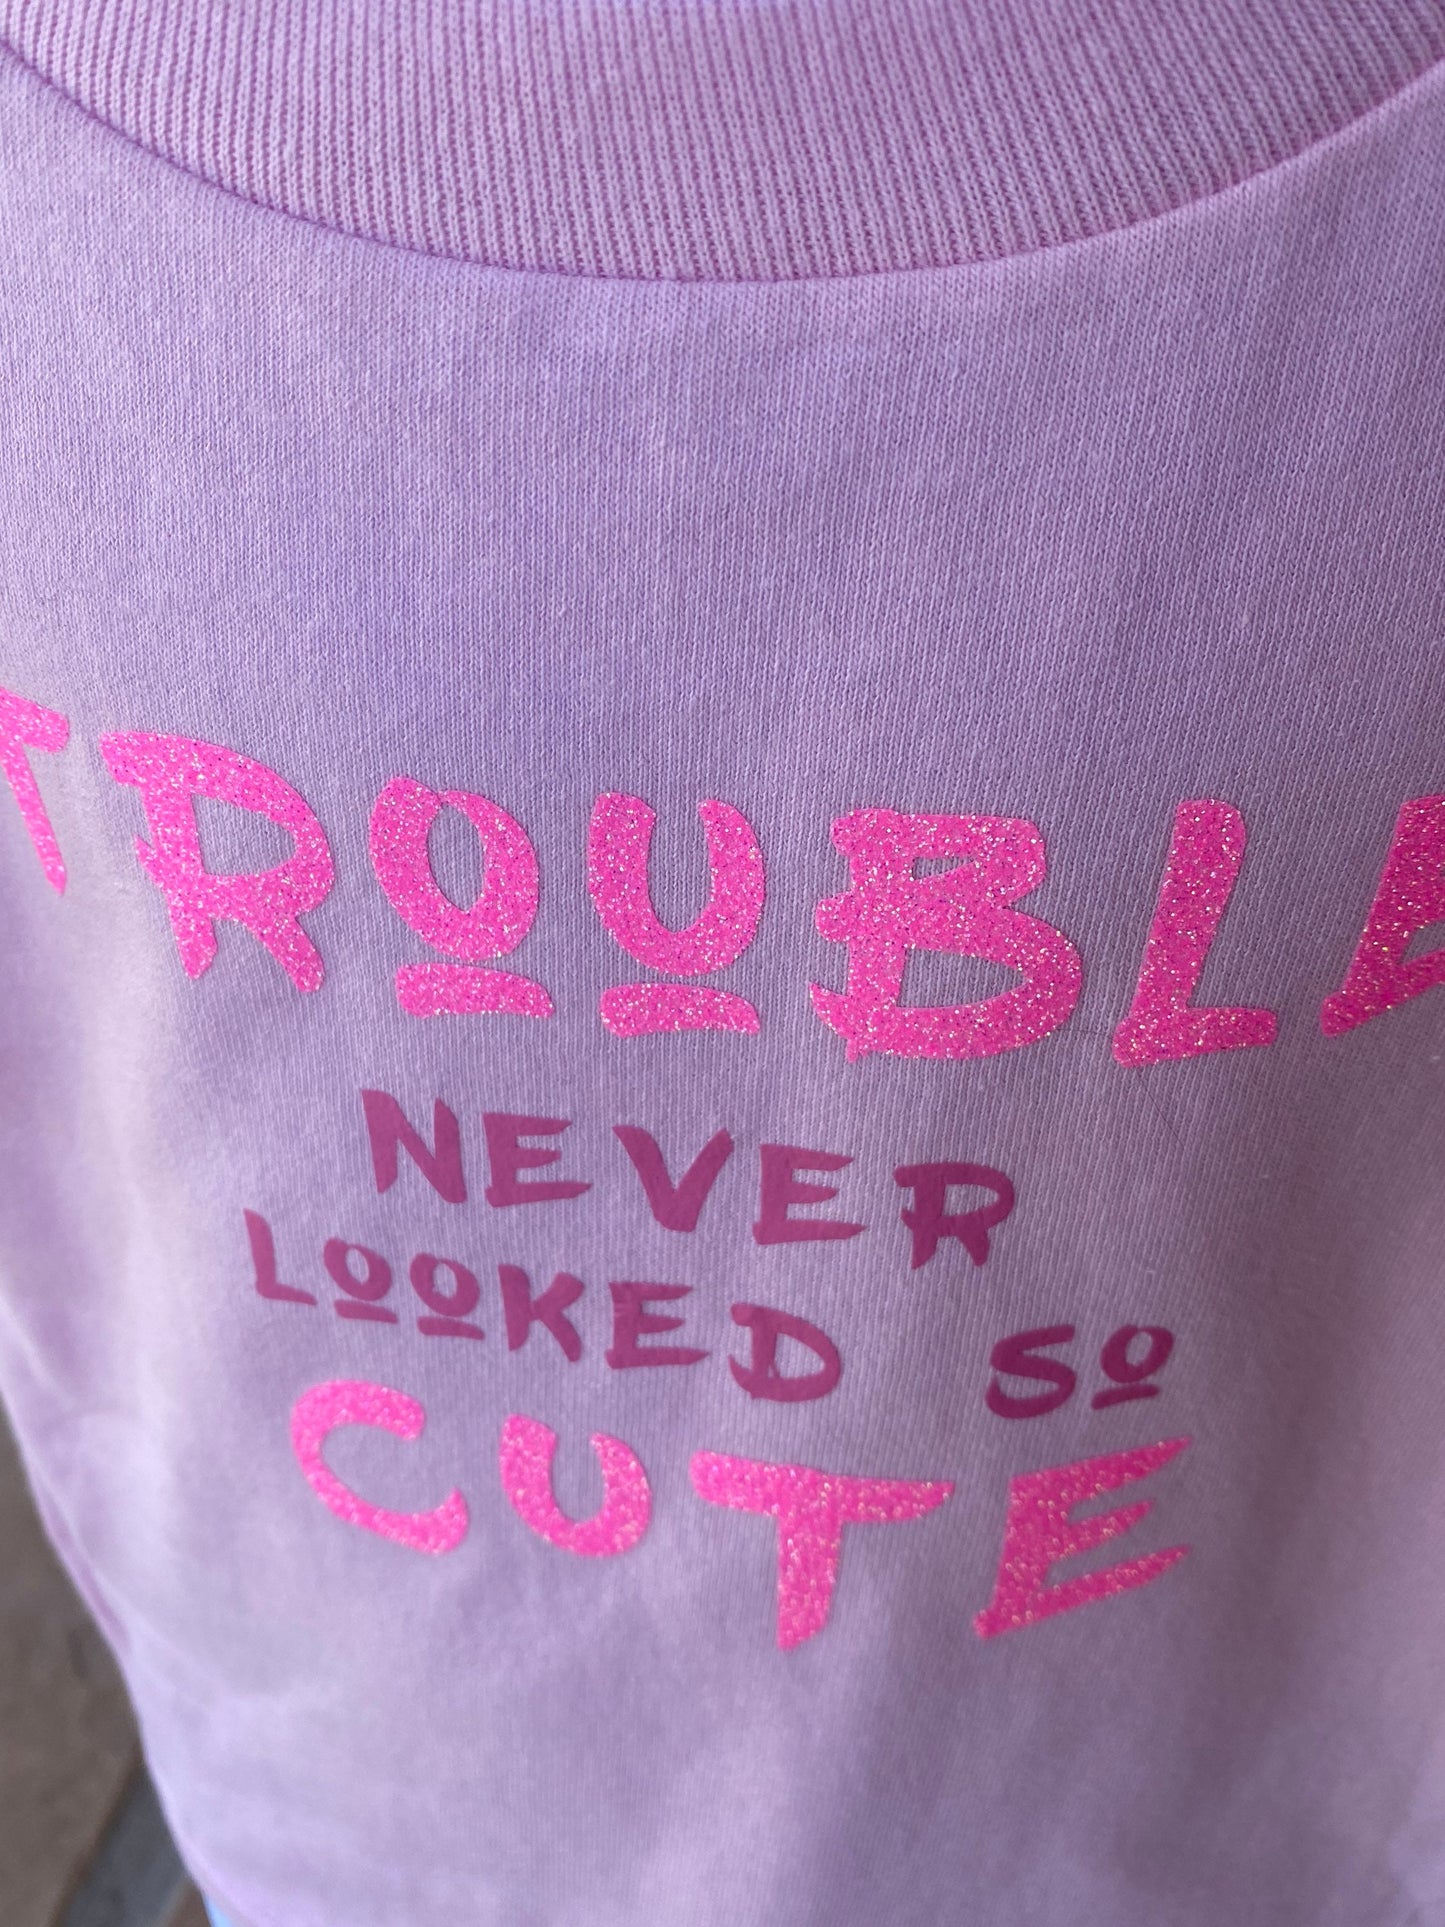 Trouble never looked so cute / funny shirt / funny kids shirt / funny kids tshirt / funny kids t shirt / funny kids tee shirt / funny tshirt